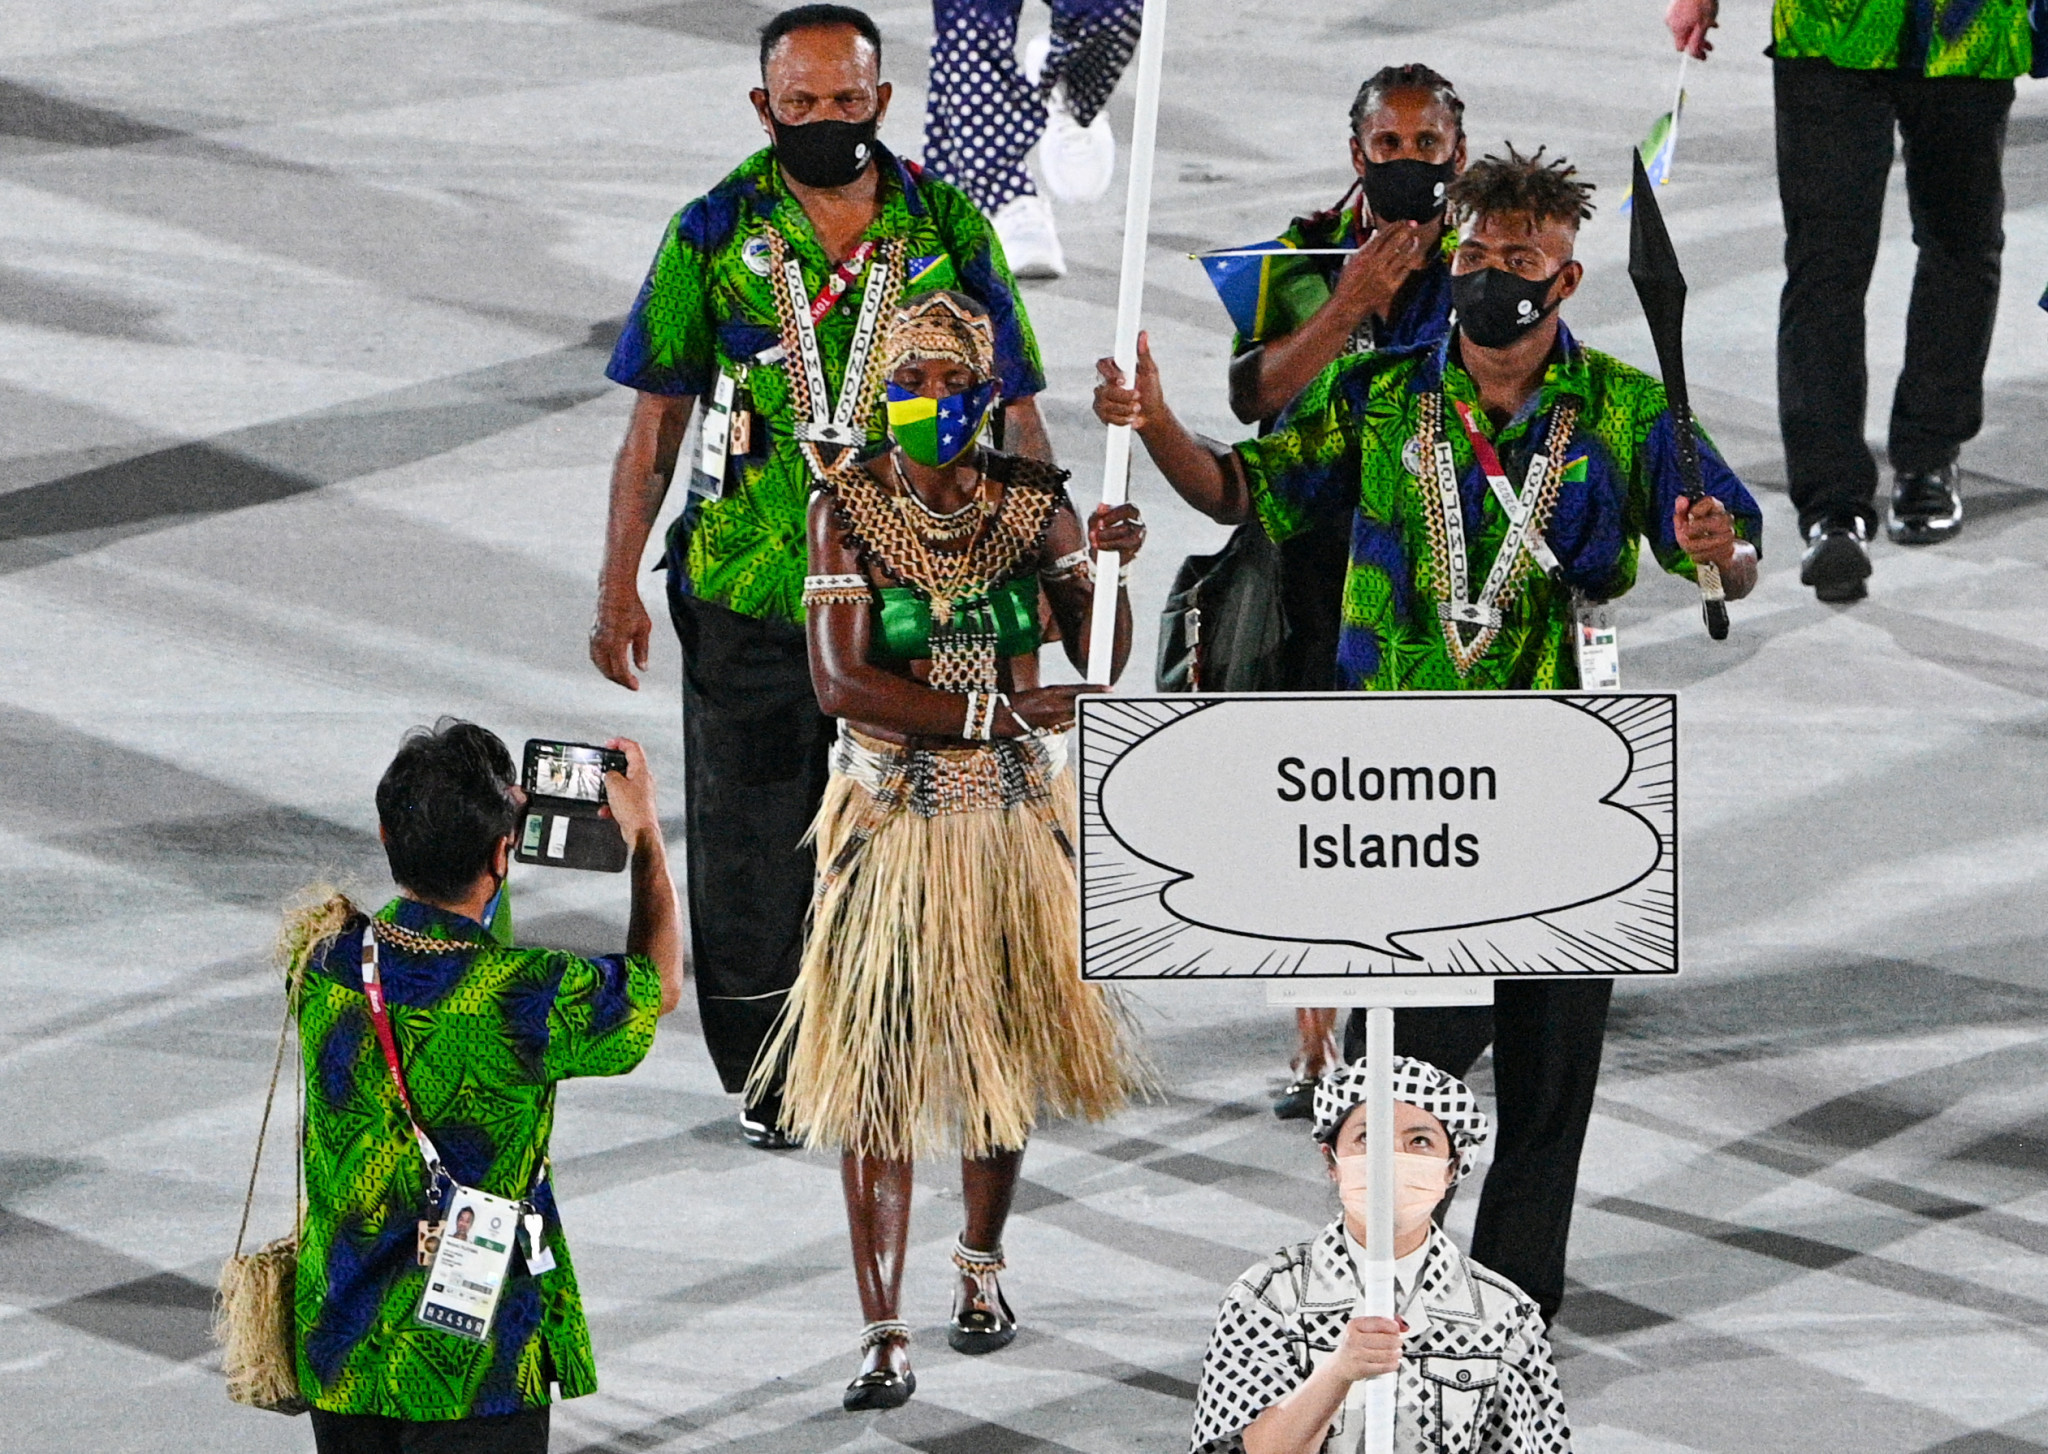 The Solomon Islands is due to host the Pacific Games for the first time in Honiara next year ©Getty Images